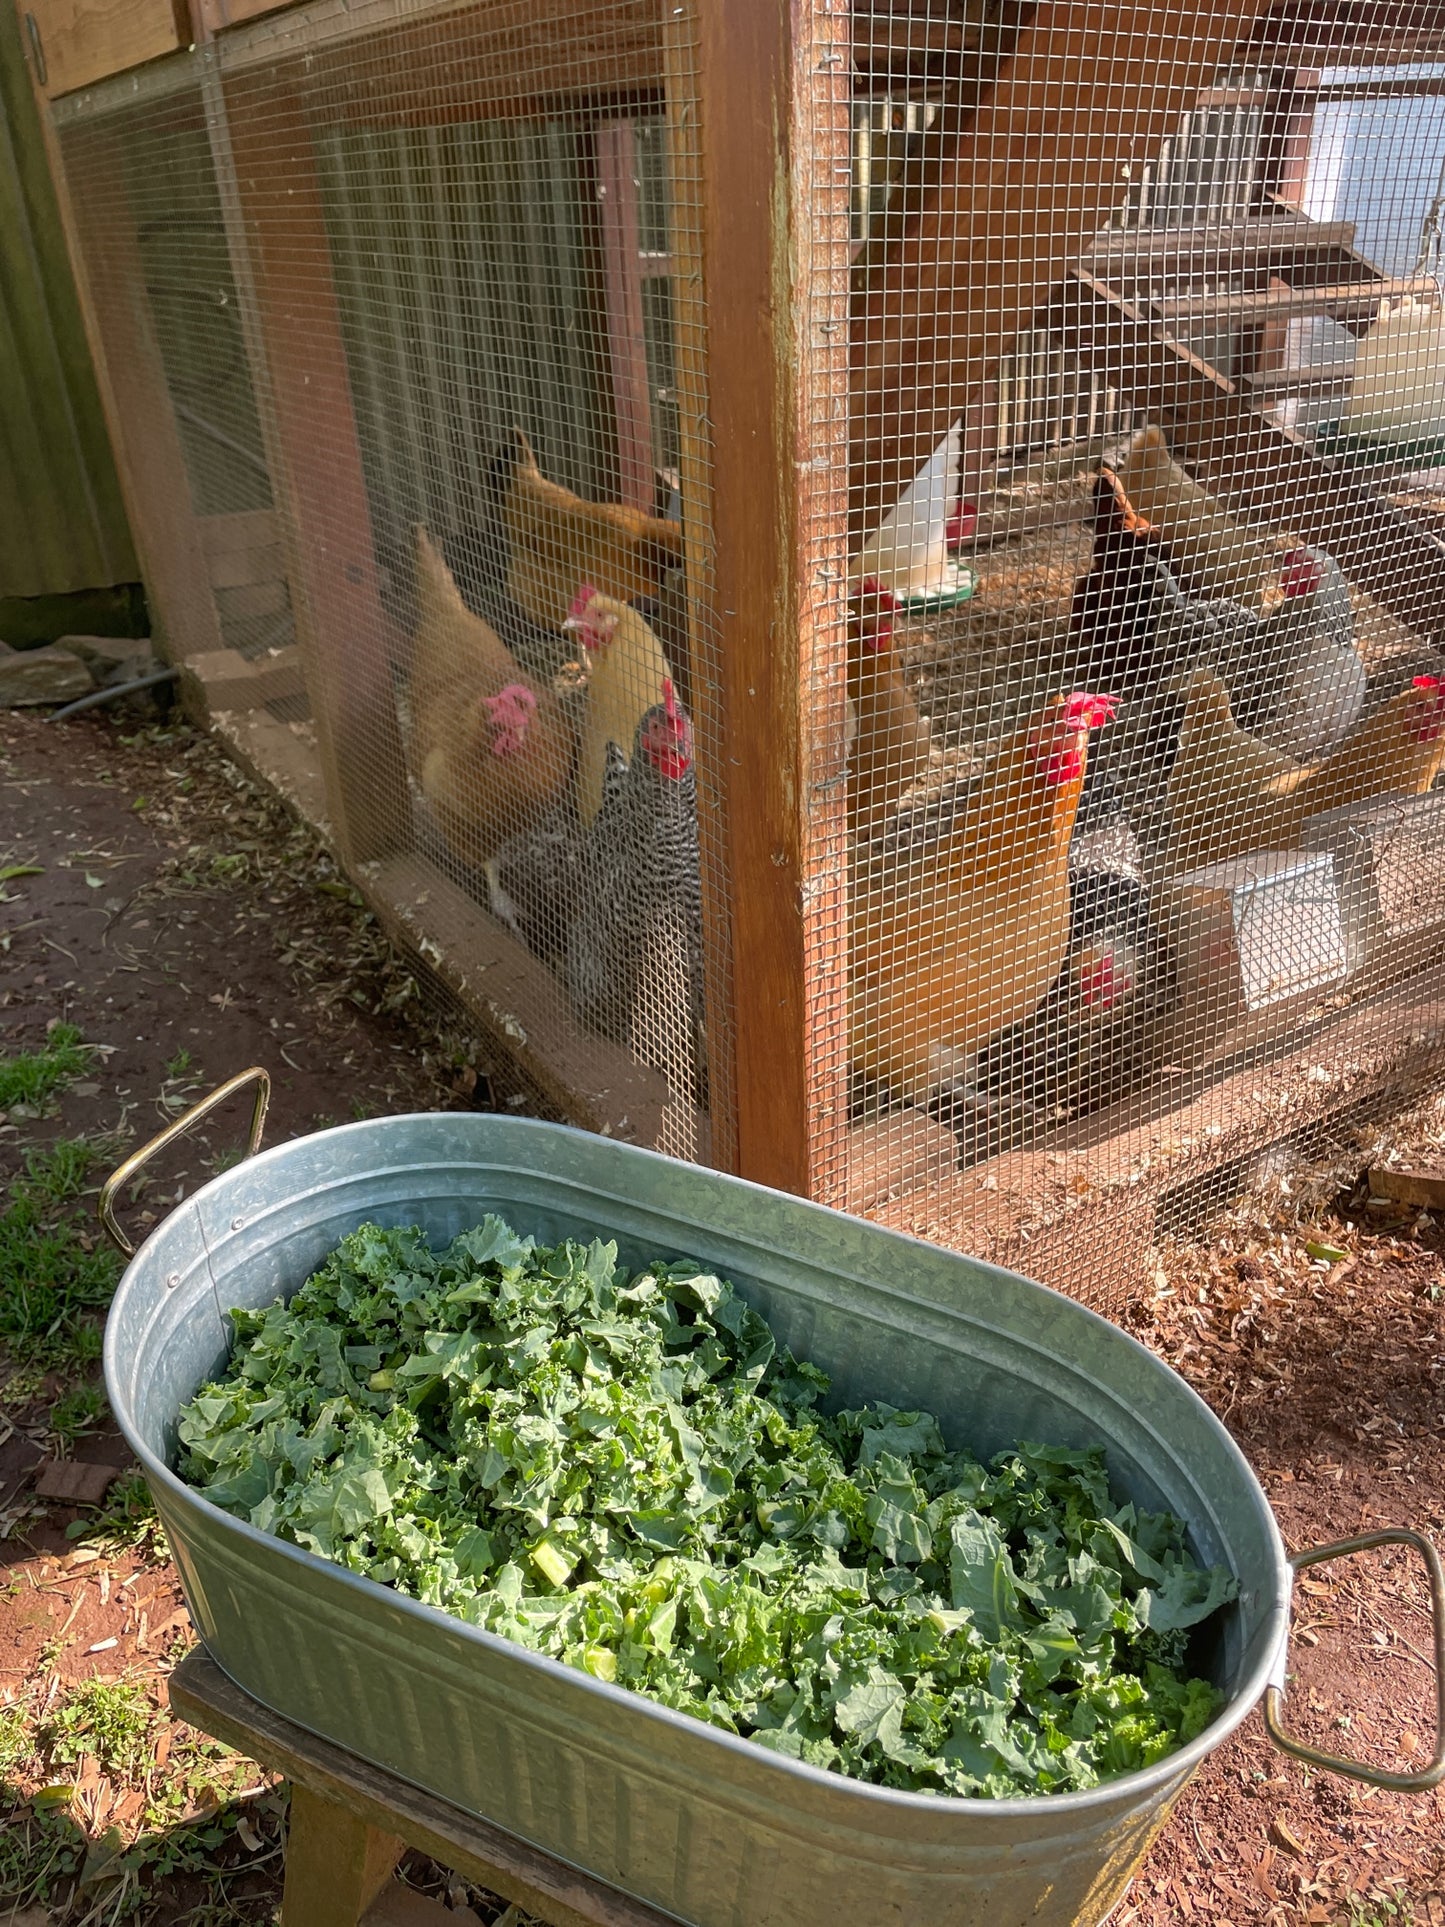 Children love feeding the chickens and ducks kale. We will set out kale for children and grown ups to feed to the animals. 